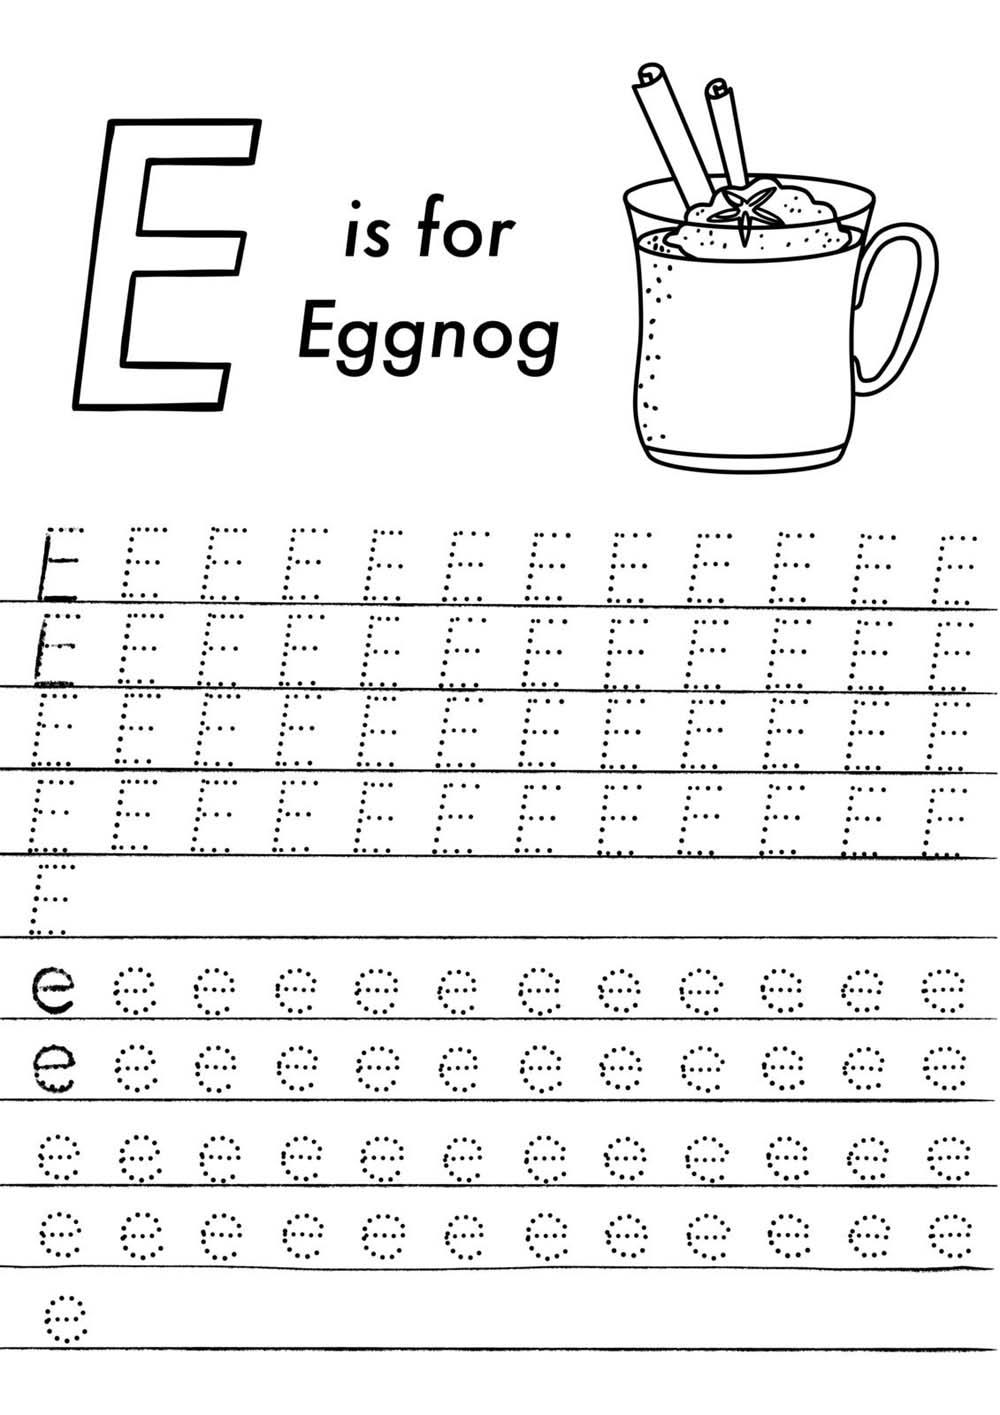 Picture Worksheet 5 e E is for Eggnog - Tracing Practice of Capital E and Small e